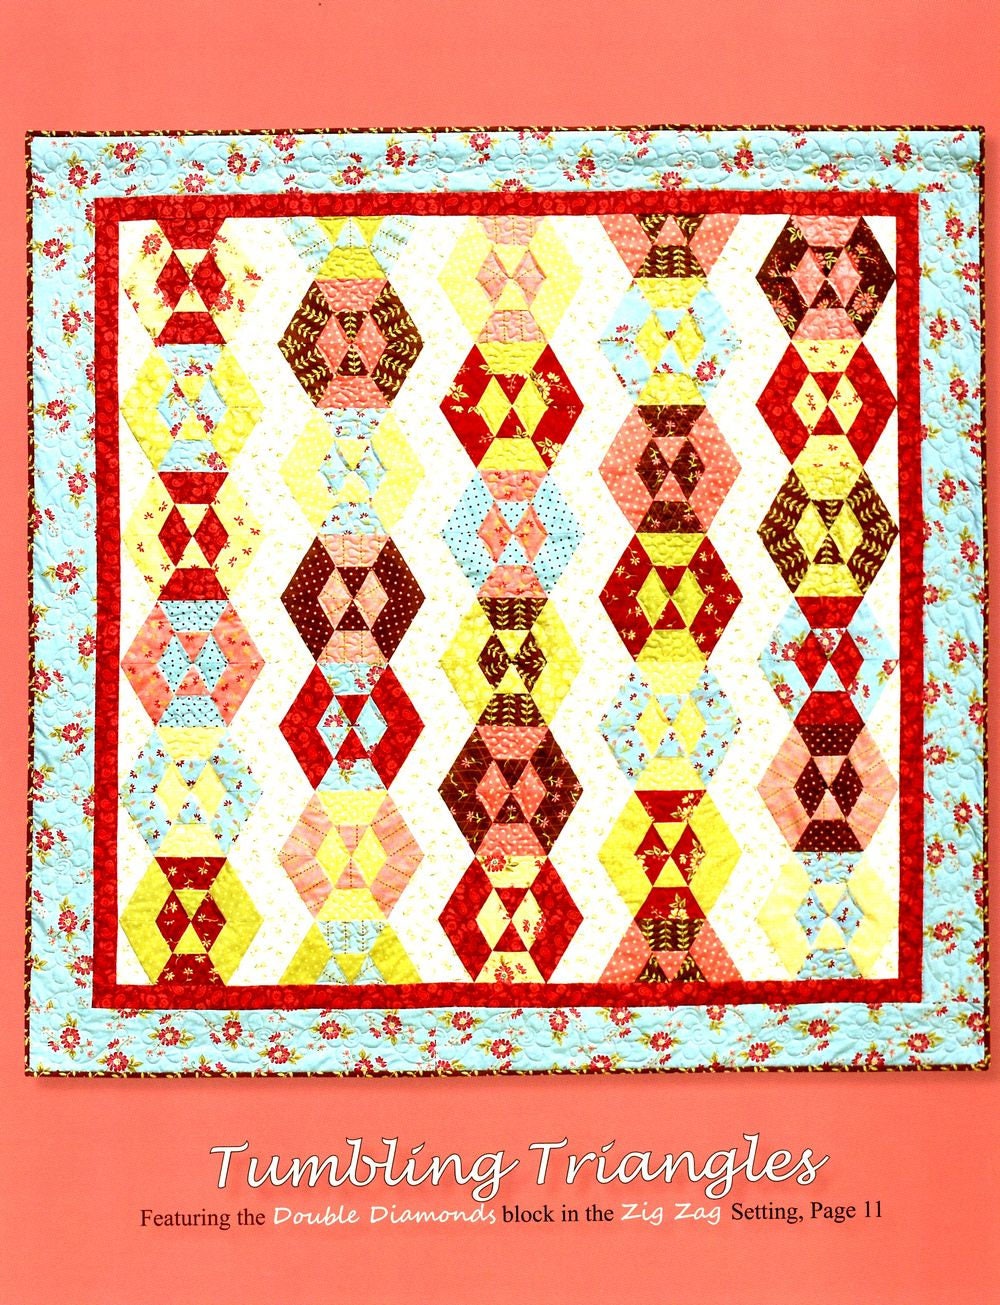 Sizzlin' Sixties Quilt Pattern Book by Heather Peterson of Anka's Treasures